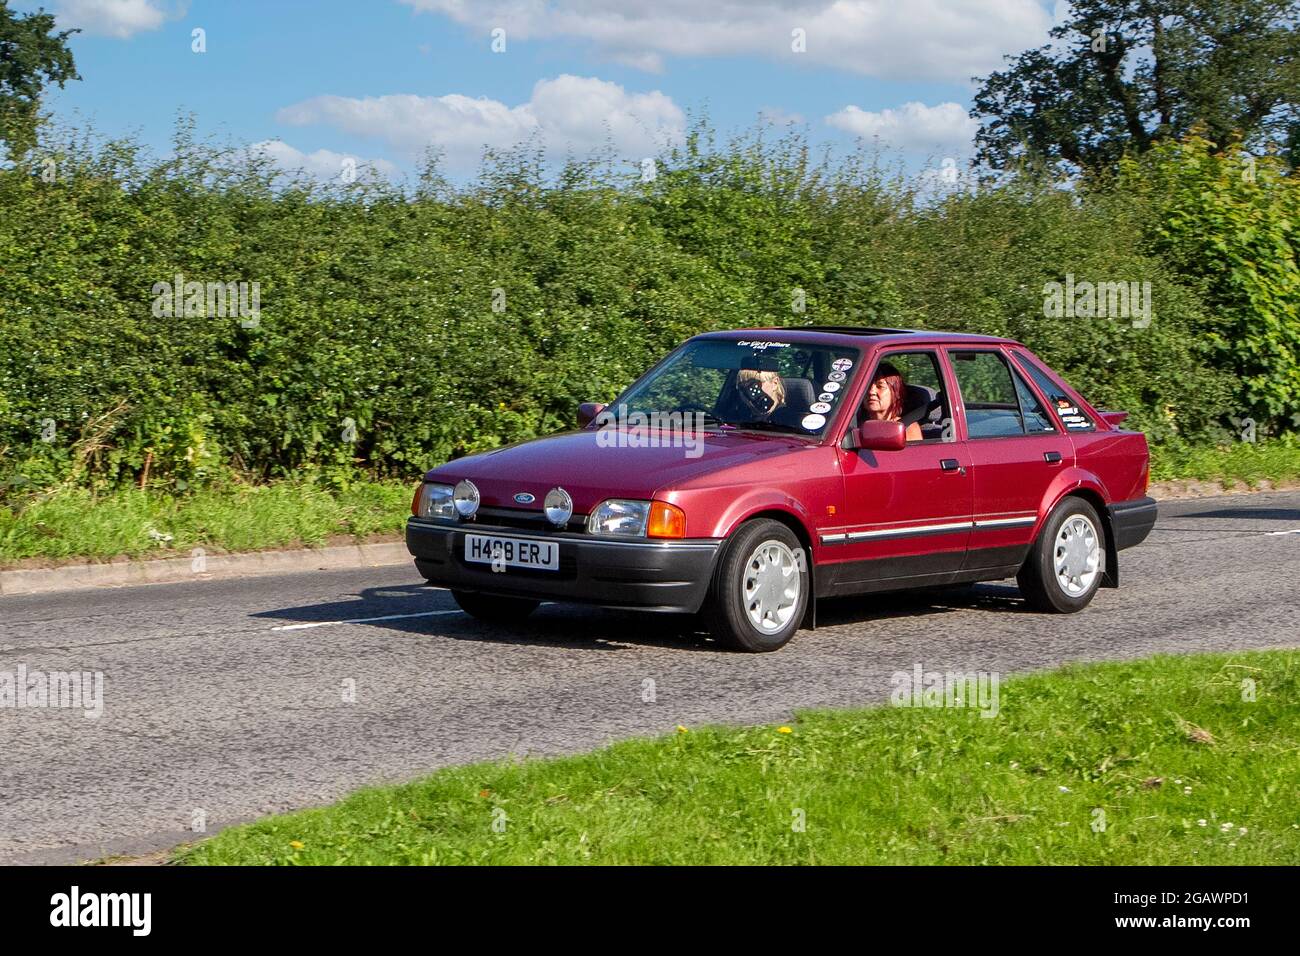 1990s, 90s, 1990 red Ford Escort Eclipse classic vintage car arriving at the Capesthorne Hall classic car show. Stock Photo